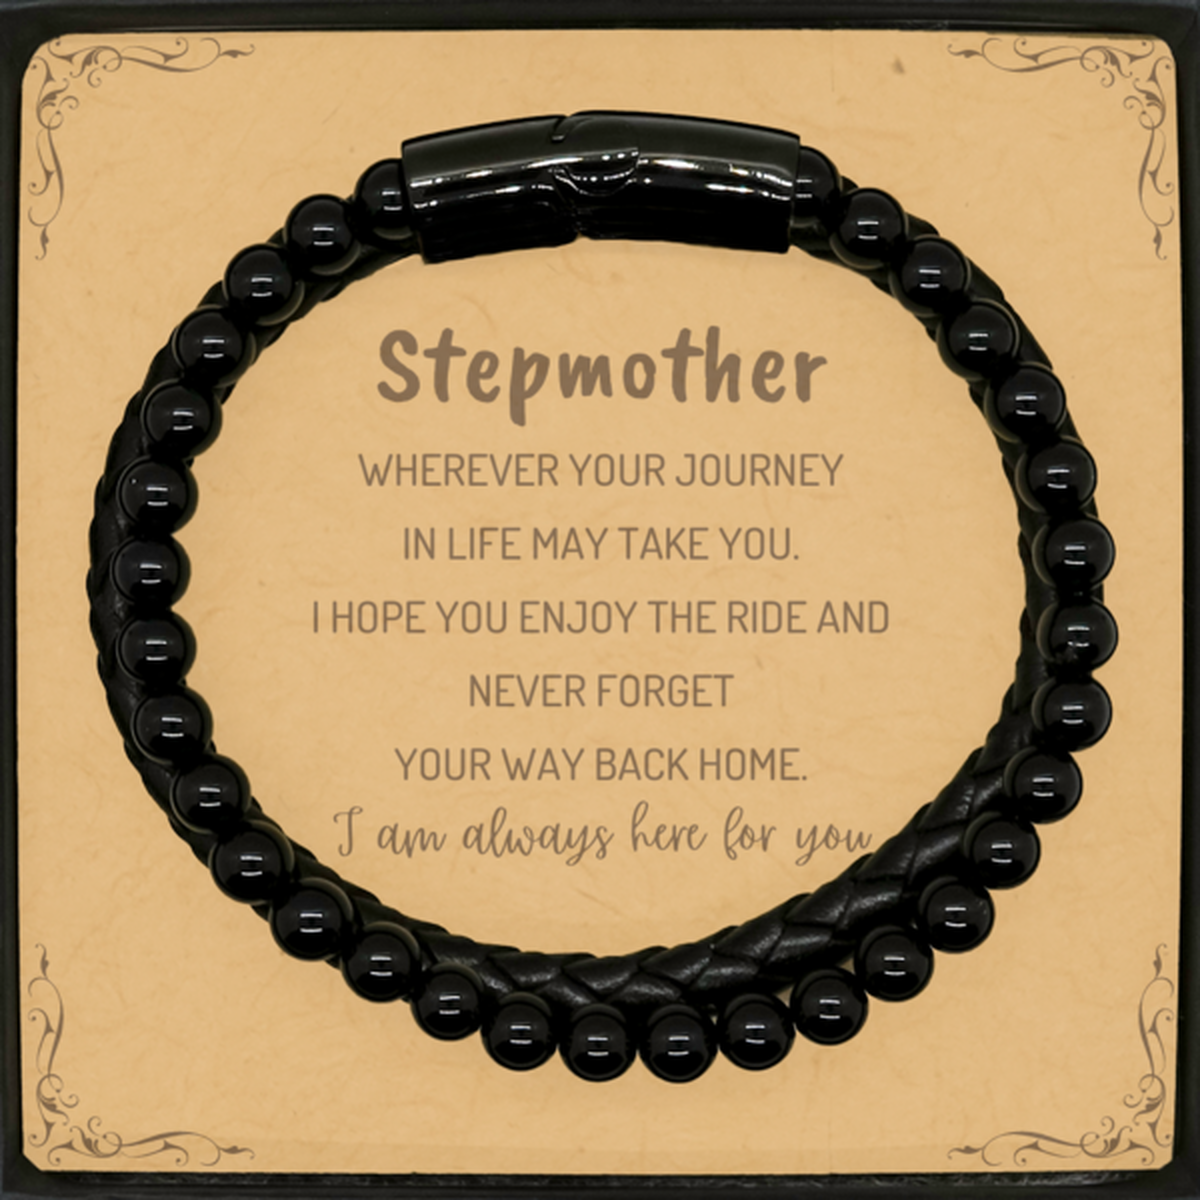 Stepmother wherever your journey in life may take you, I am always here for you Stepmother Stone Leather Bracelets, Awesome Christmas Gifts For Stepmother Message Card, Stepmother Birthday Gifts for Men Women Family Loved One